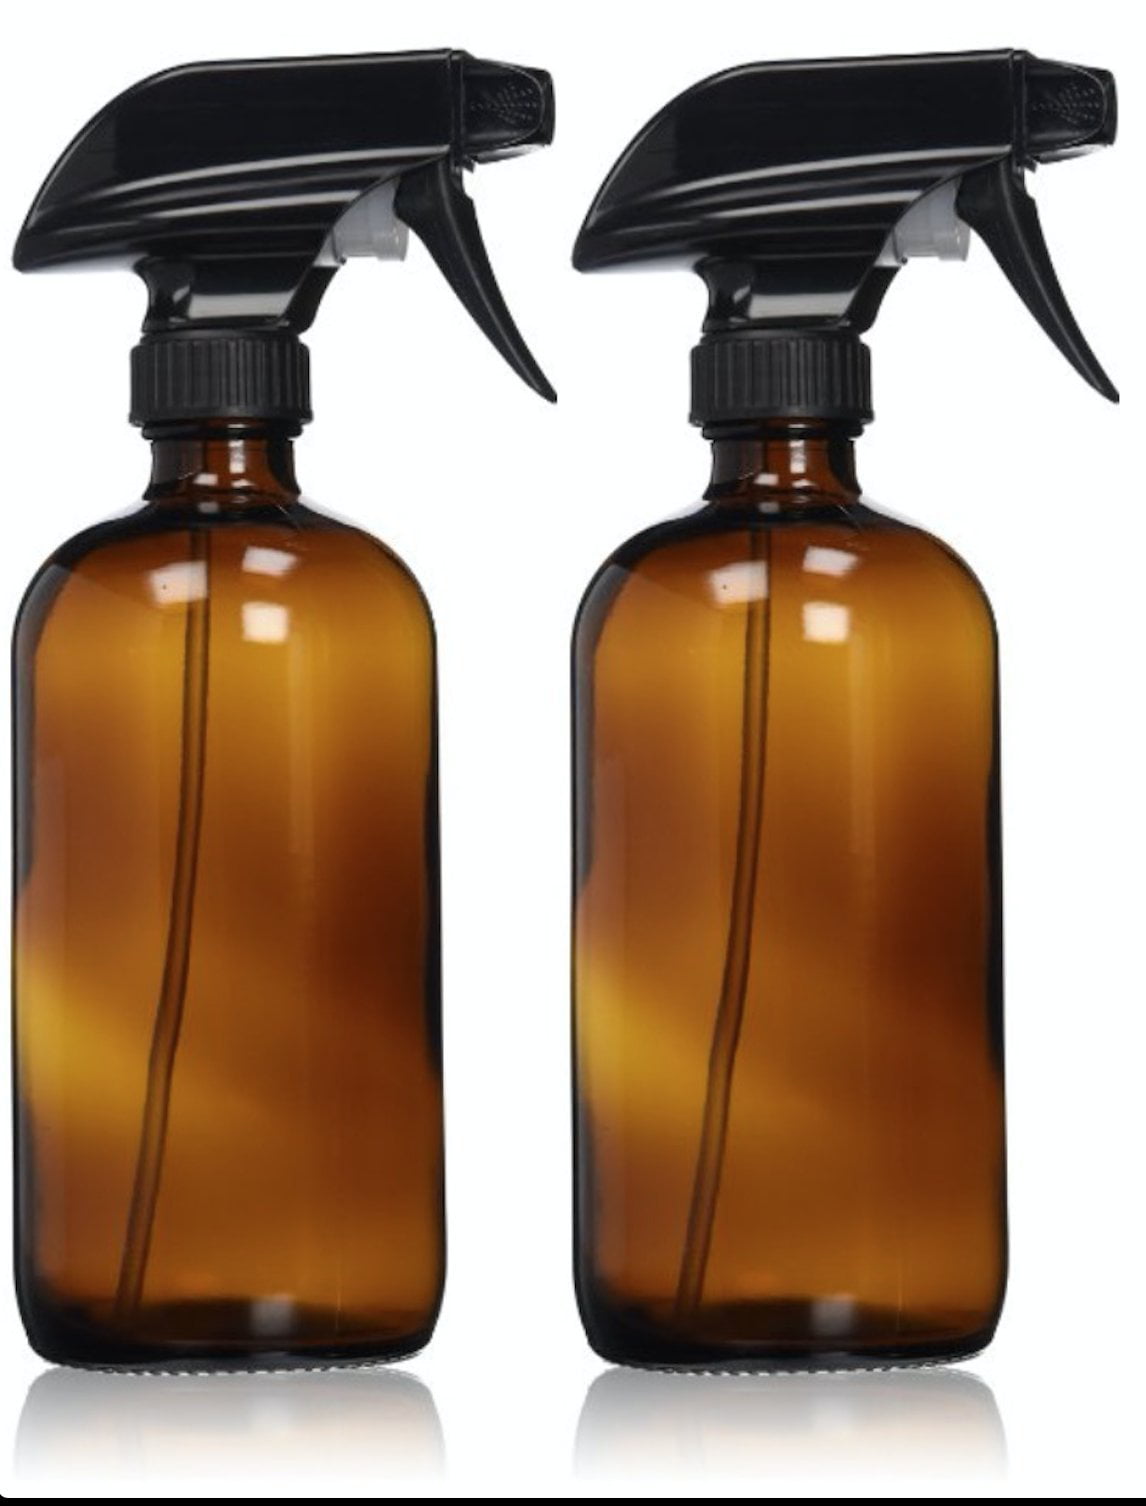 2 Pack 16oz Amber Glass Spray Bottles or Aromatherapy Spraying Plant ,Refillable Trigger Sprayer Container Brown Mist /& Stream Mister for Essential Oils Cleaning Products